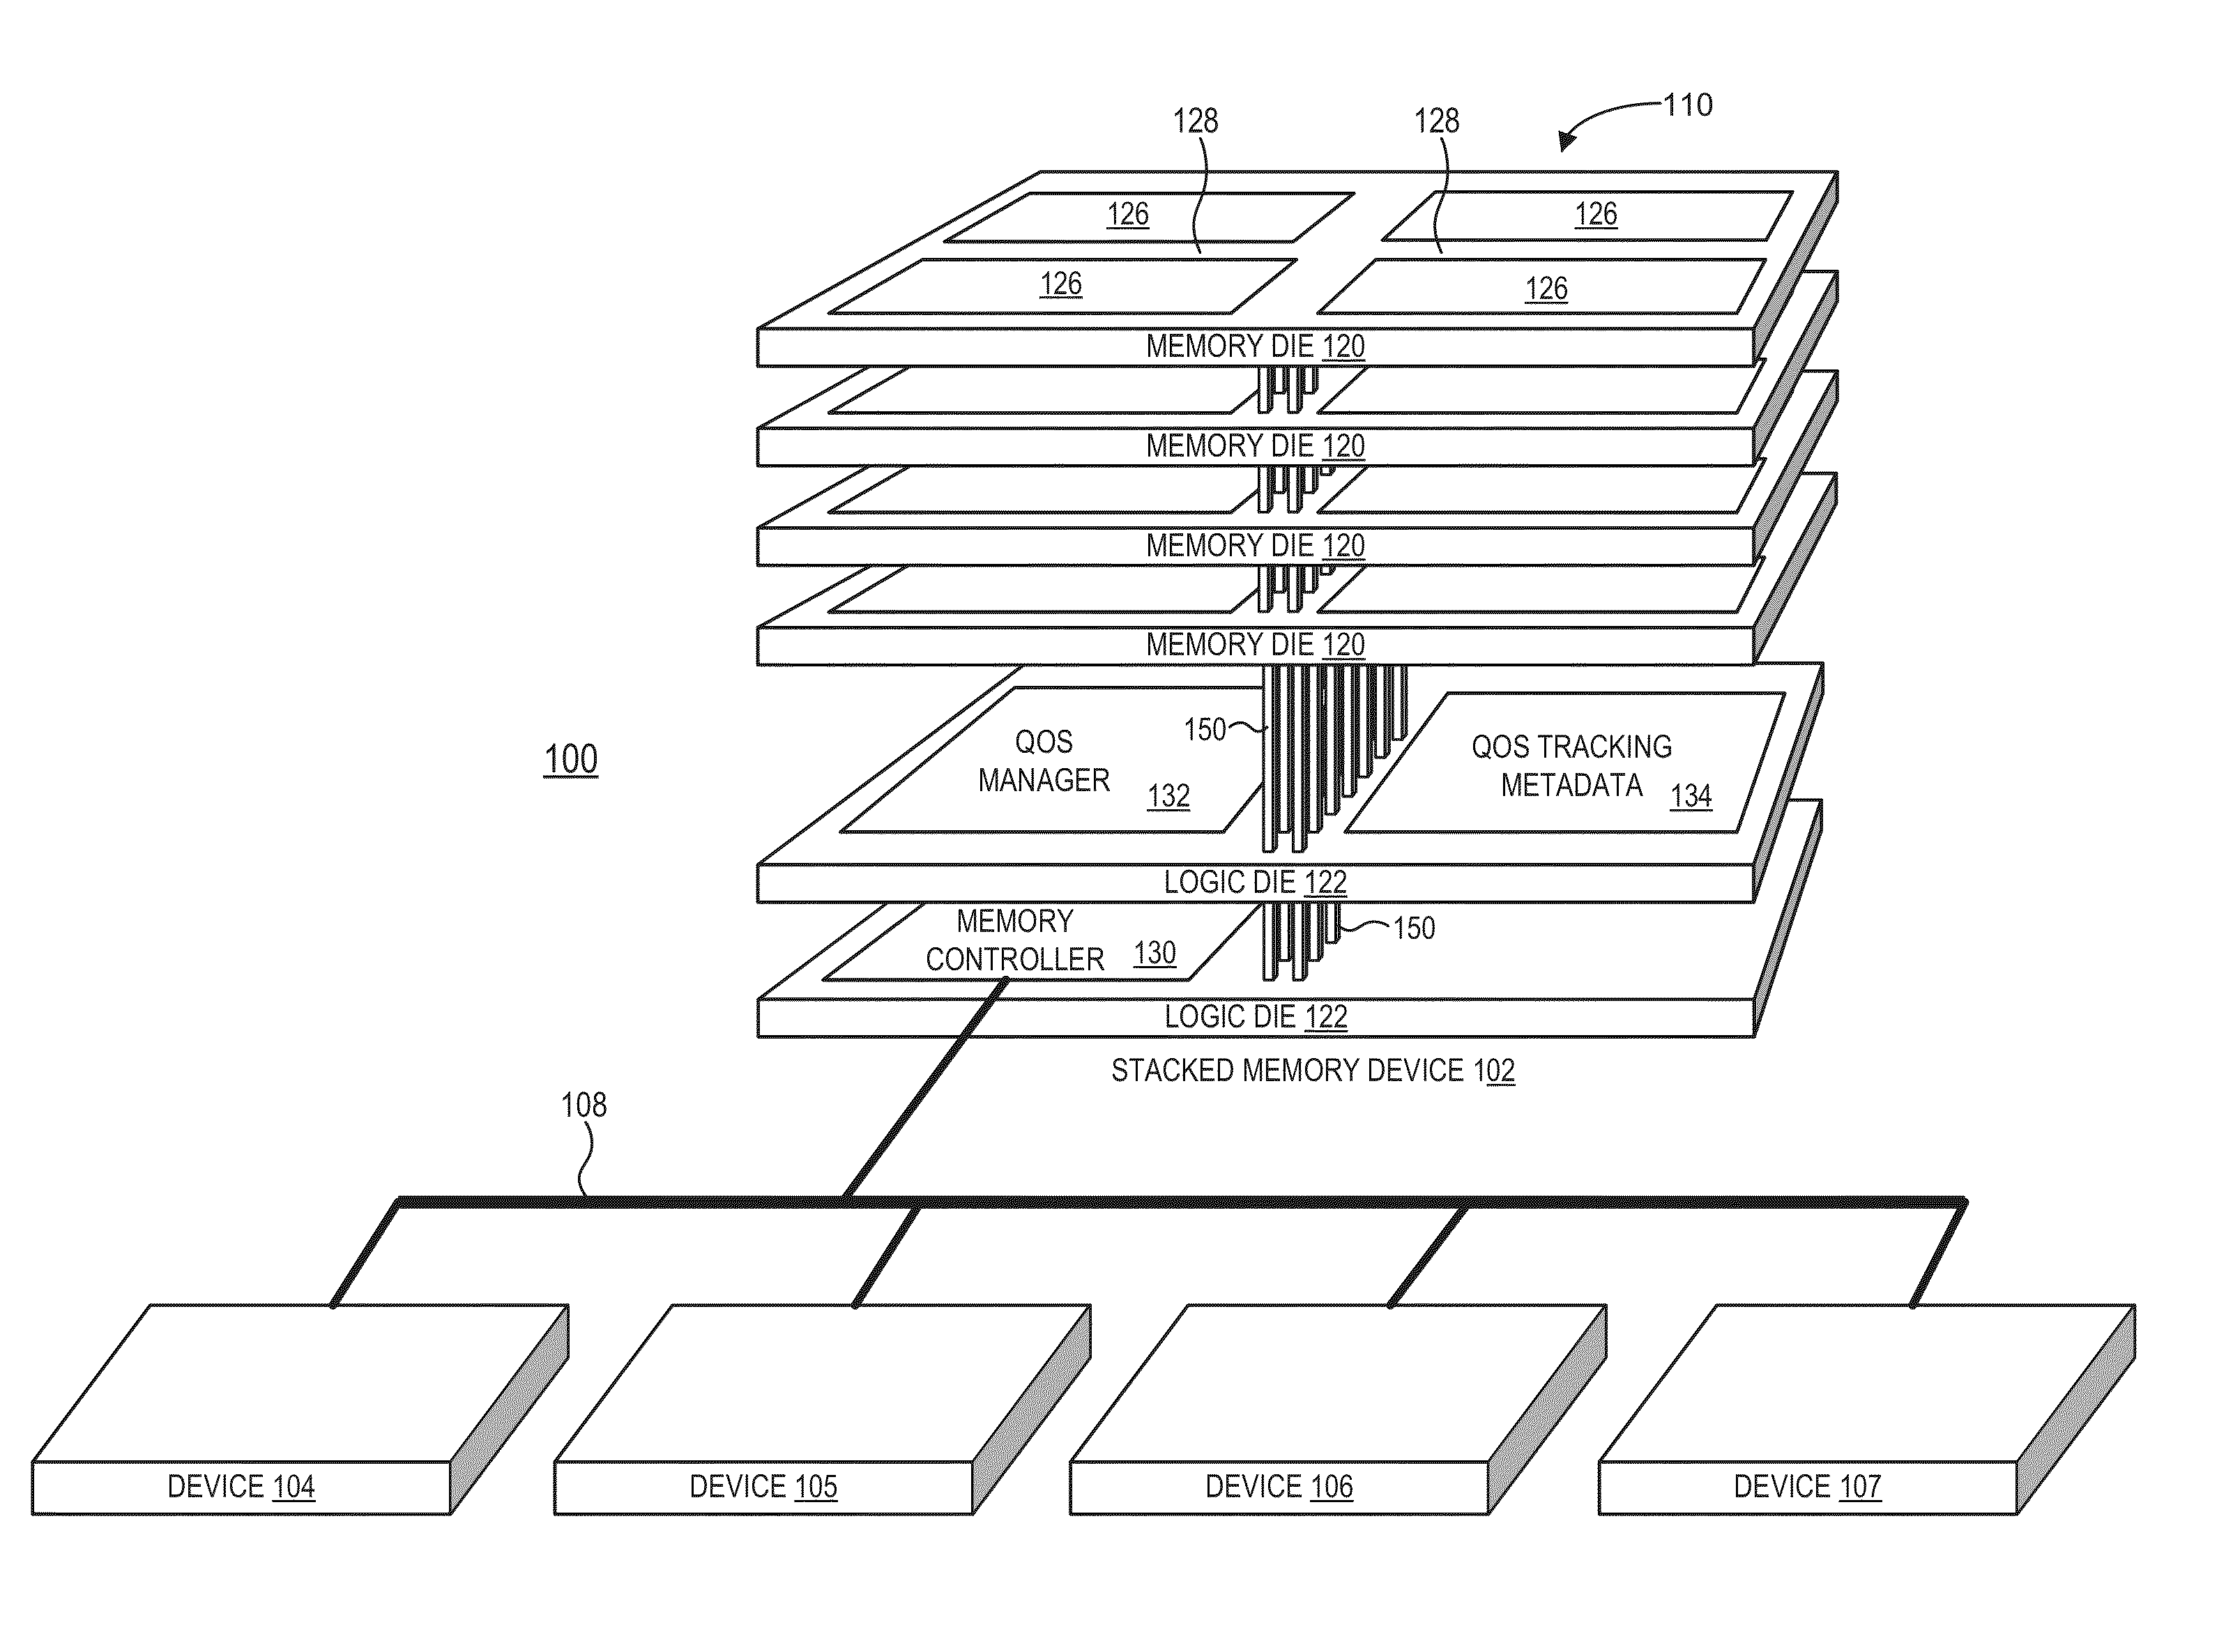 Quality of service support using stacked memory device with logic die